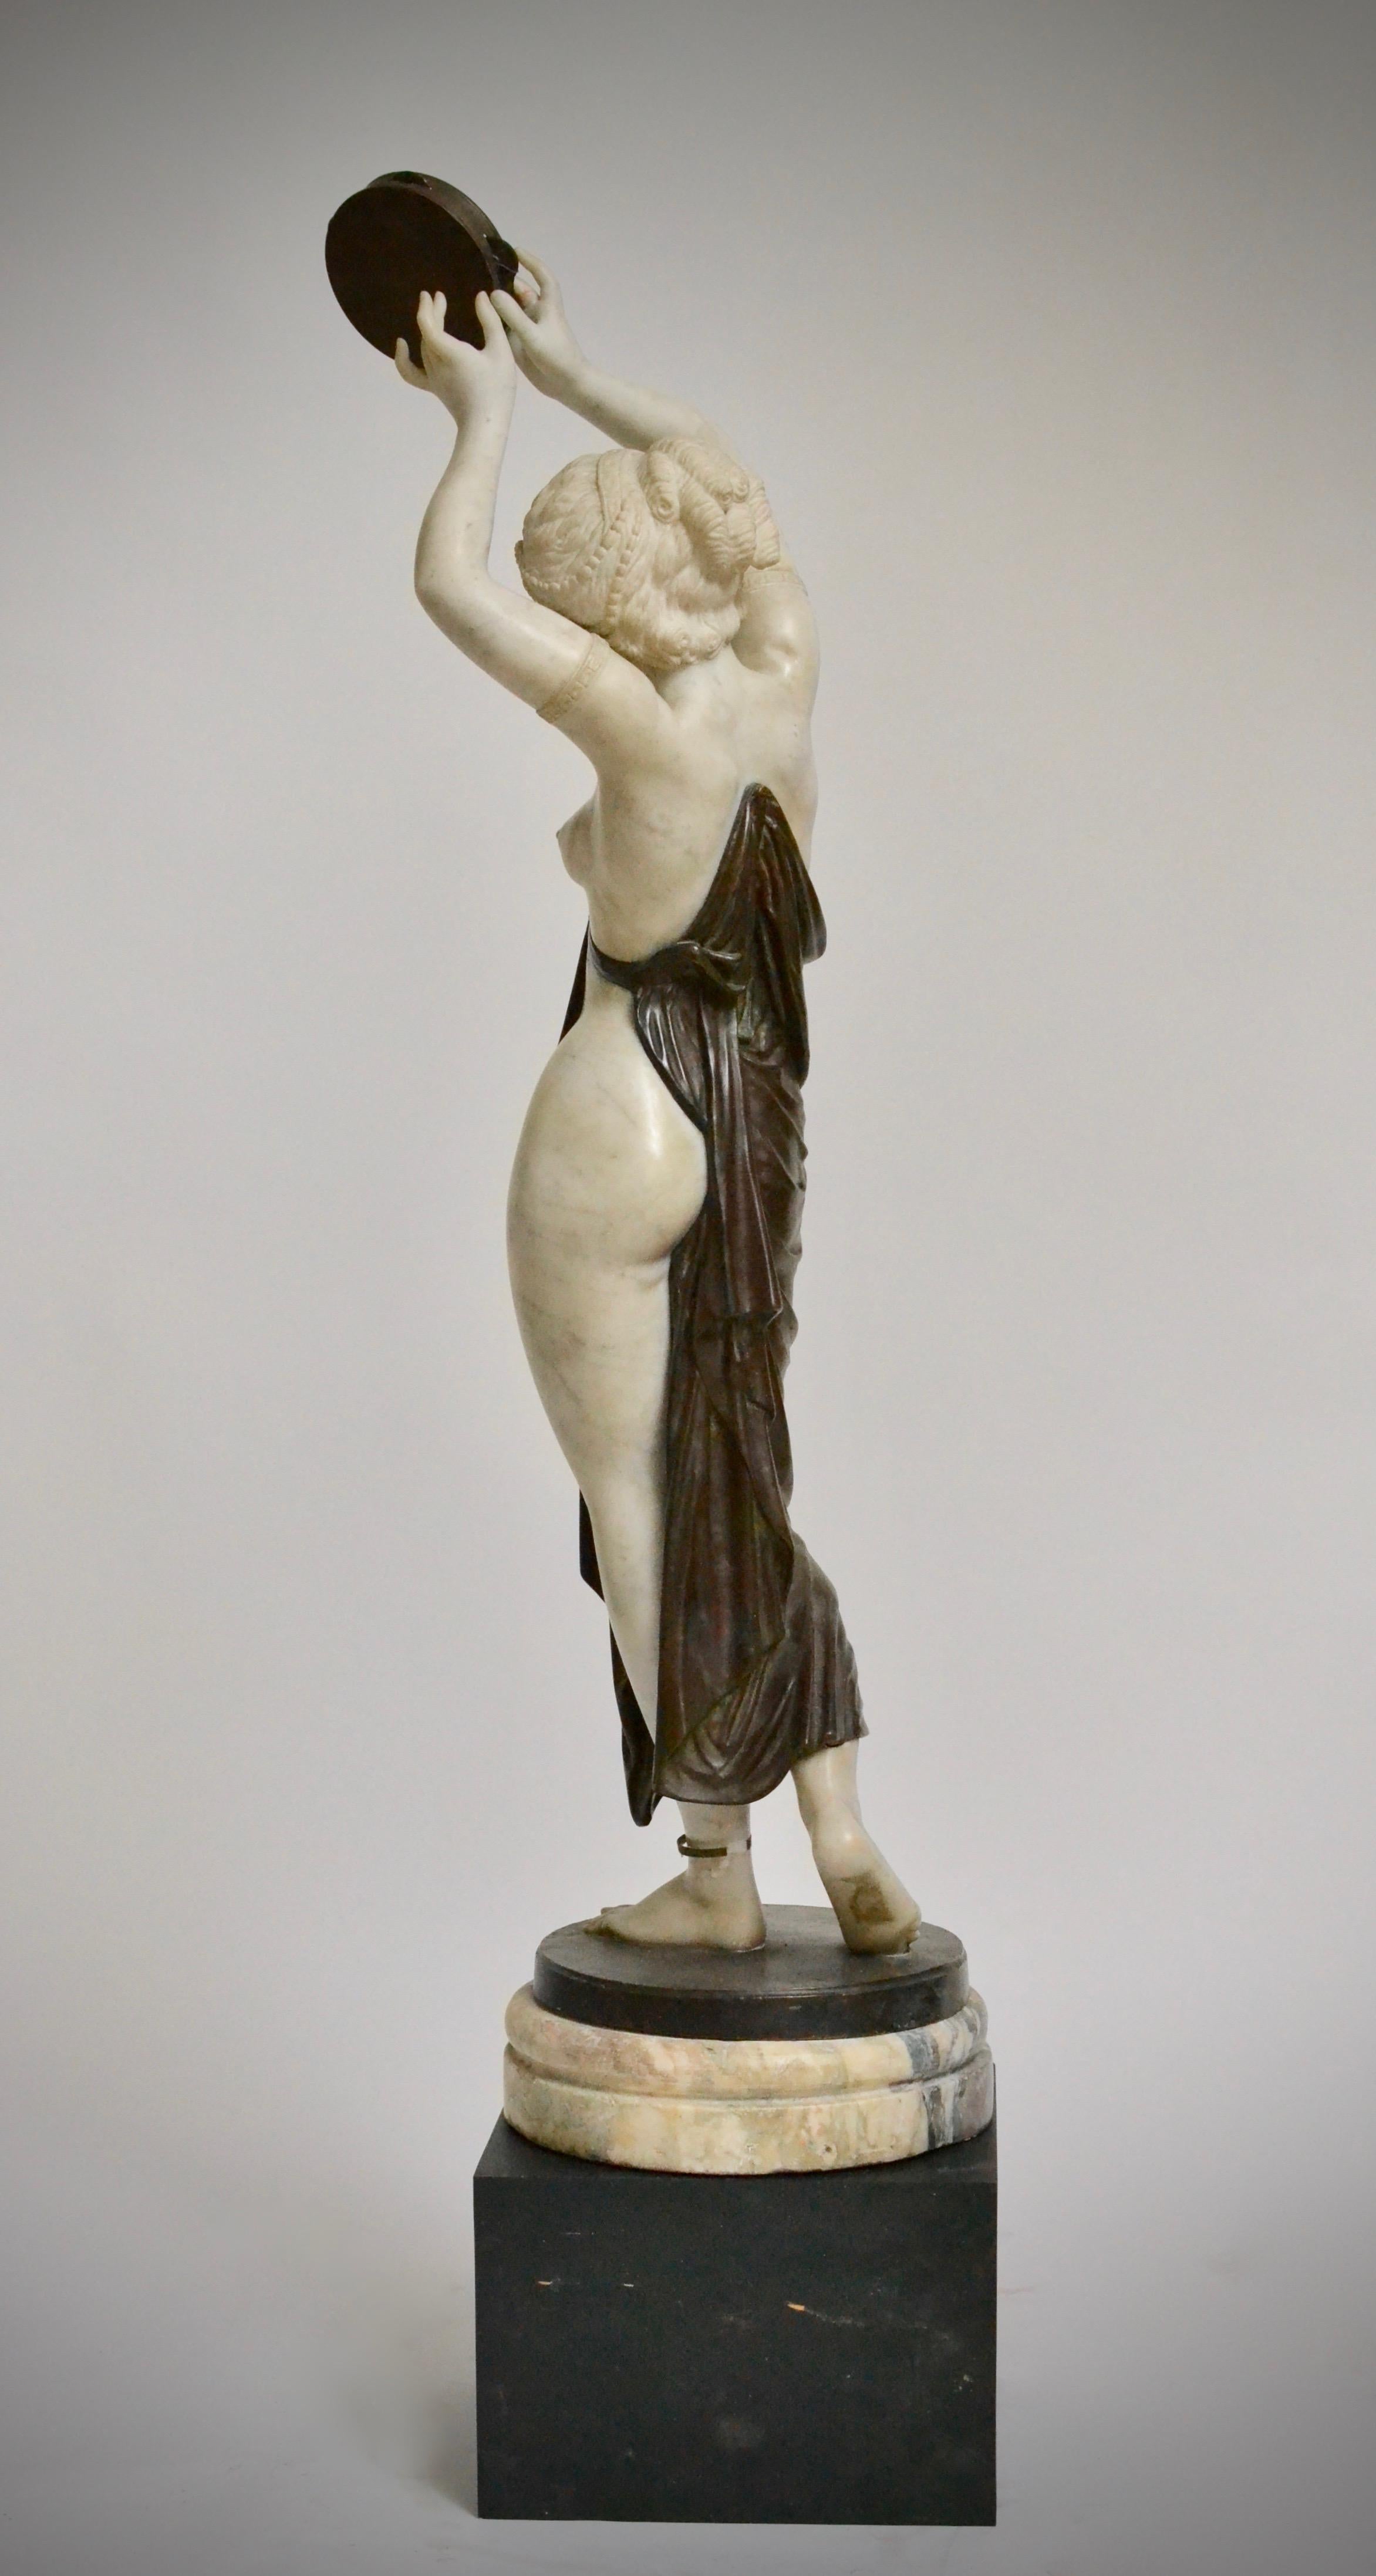 European Marble and Bronze Sculpture of a Dancing Woman Holding a Tambourine